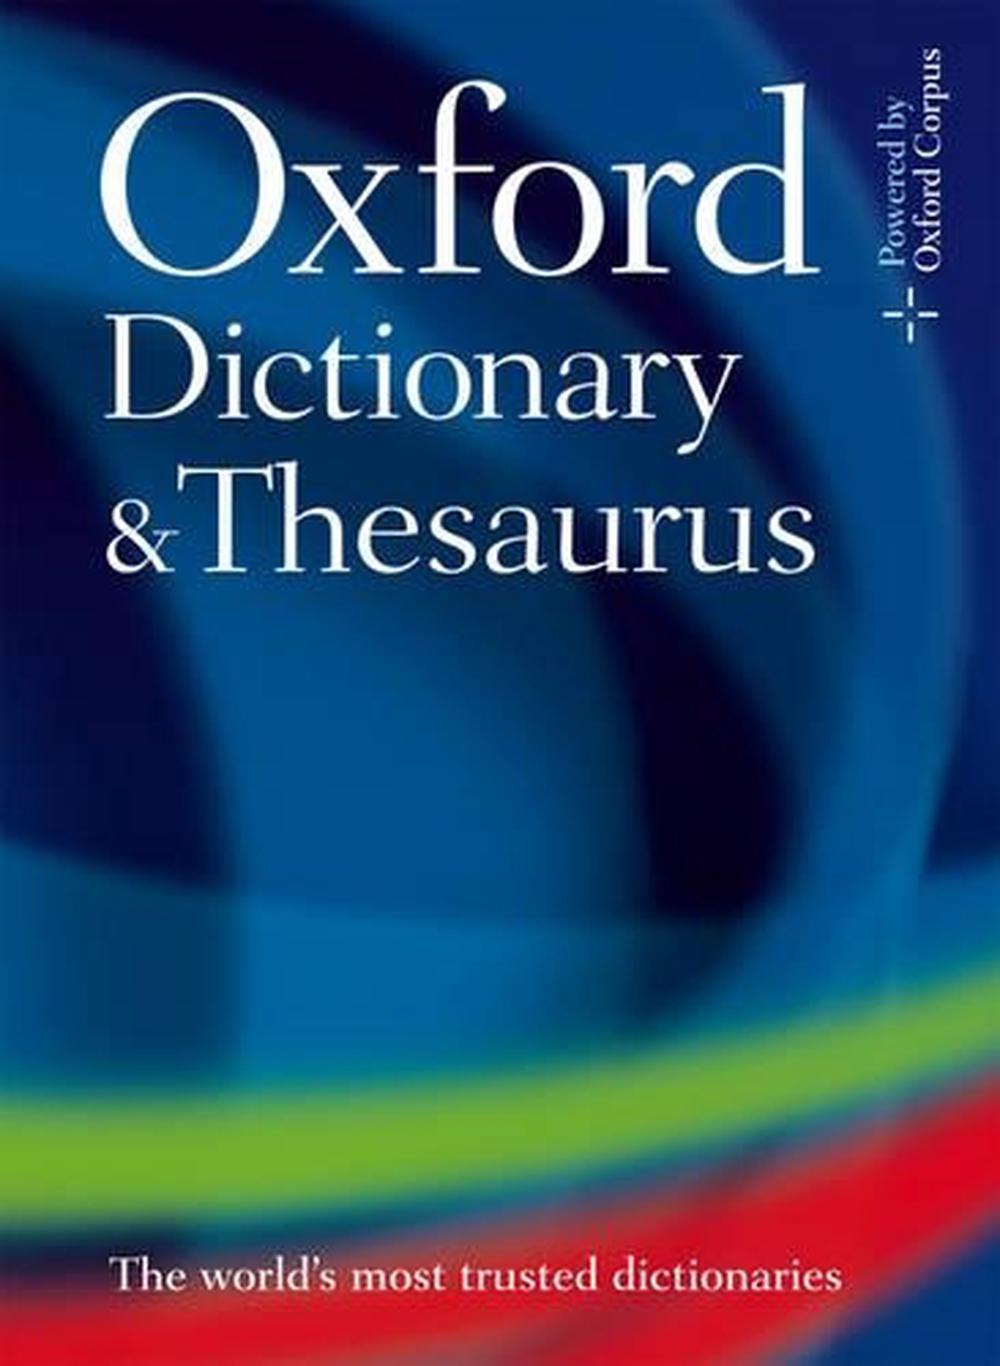 autobiography in oxford english dictionary